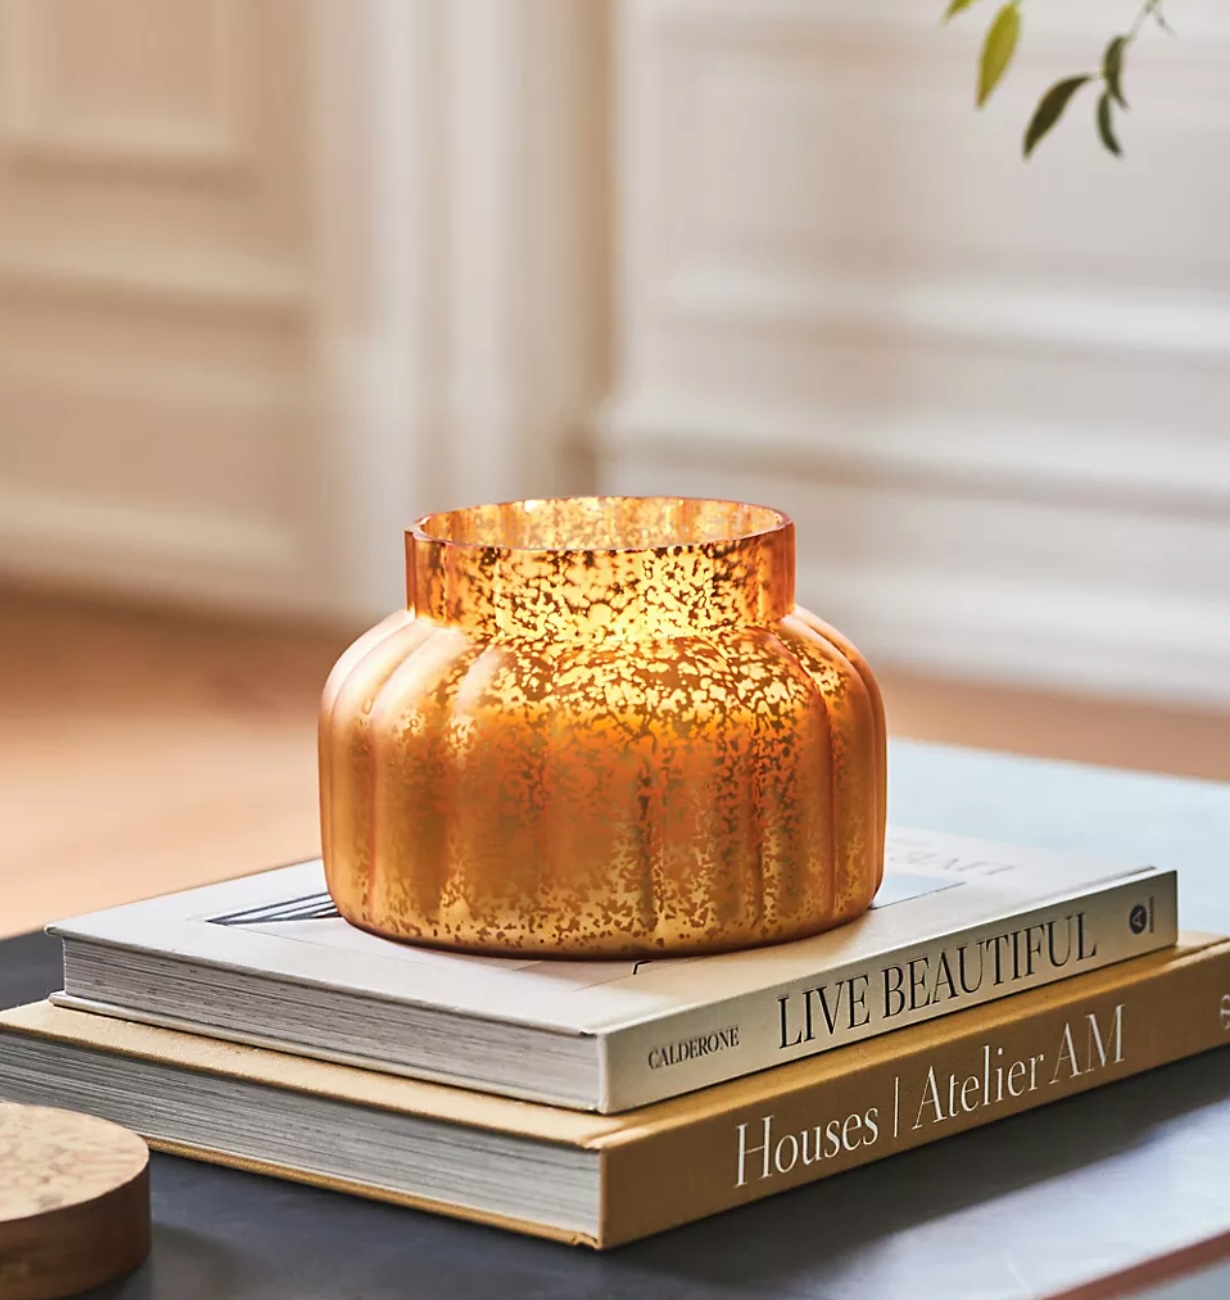 The Best Halloween Decorations: Capri Pumpkin Clove Candle on a Coffee Table of Books